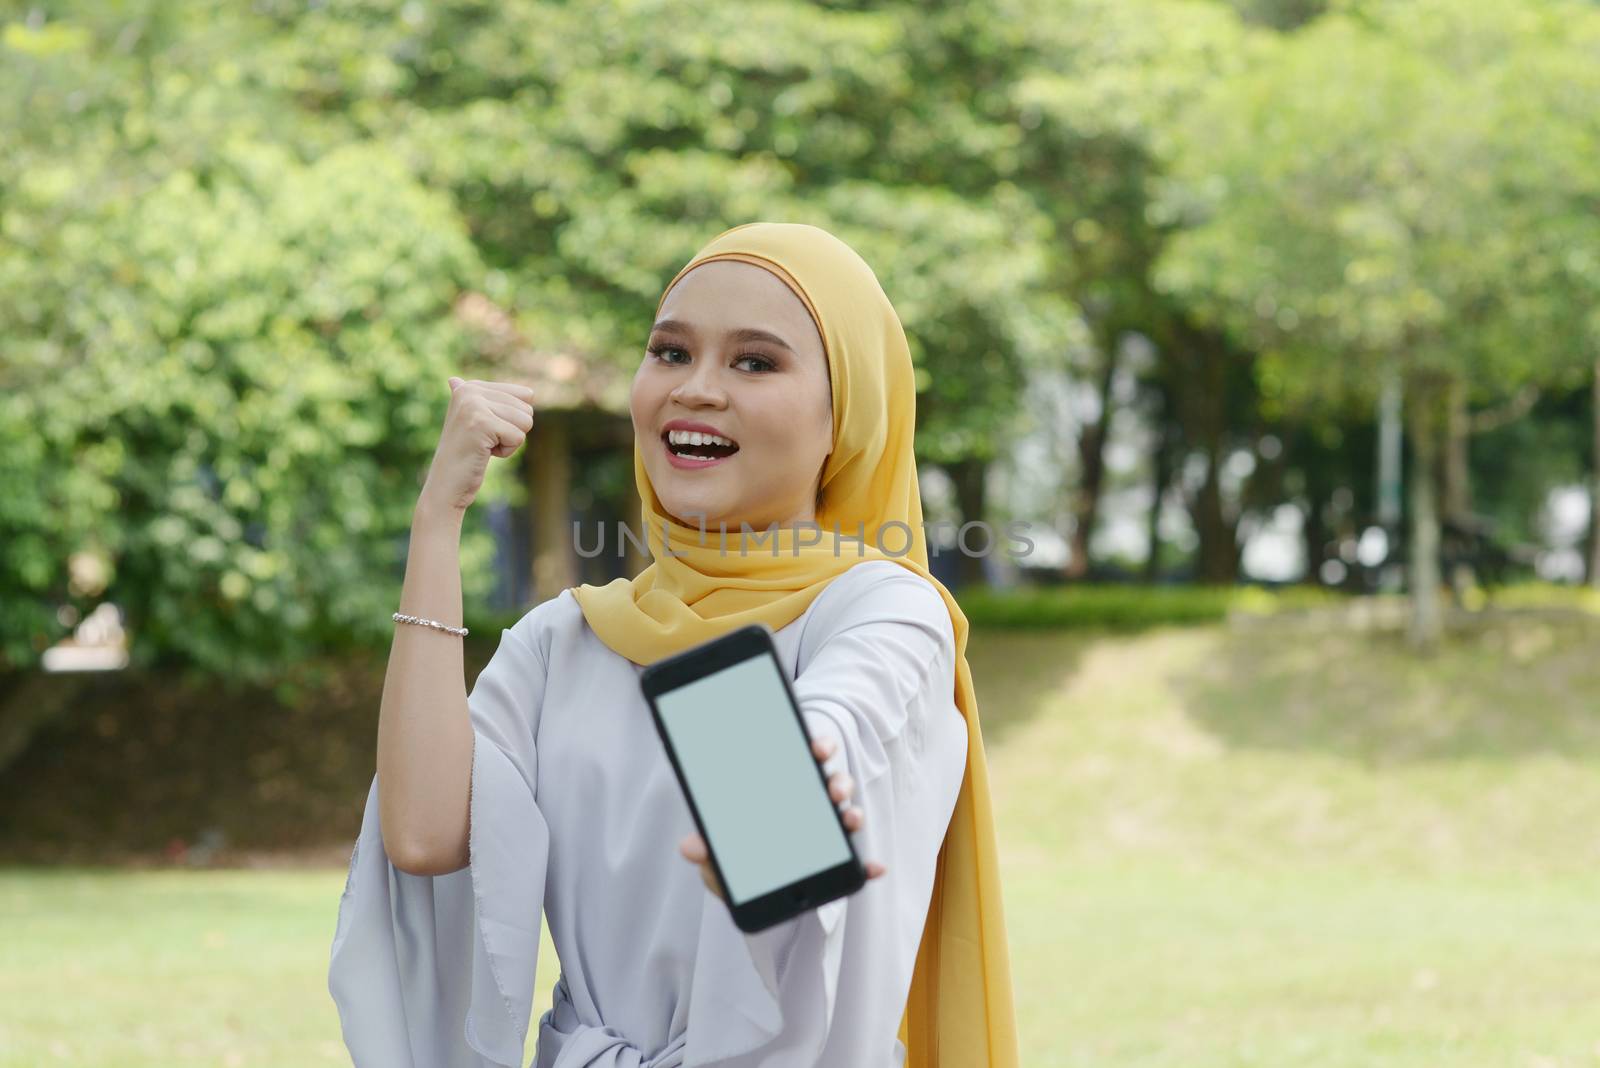 Portrait of cheerful Muslim girl using smartphone and thumb up, smiling at outdoor.